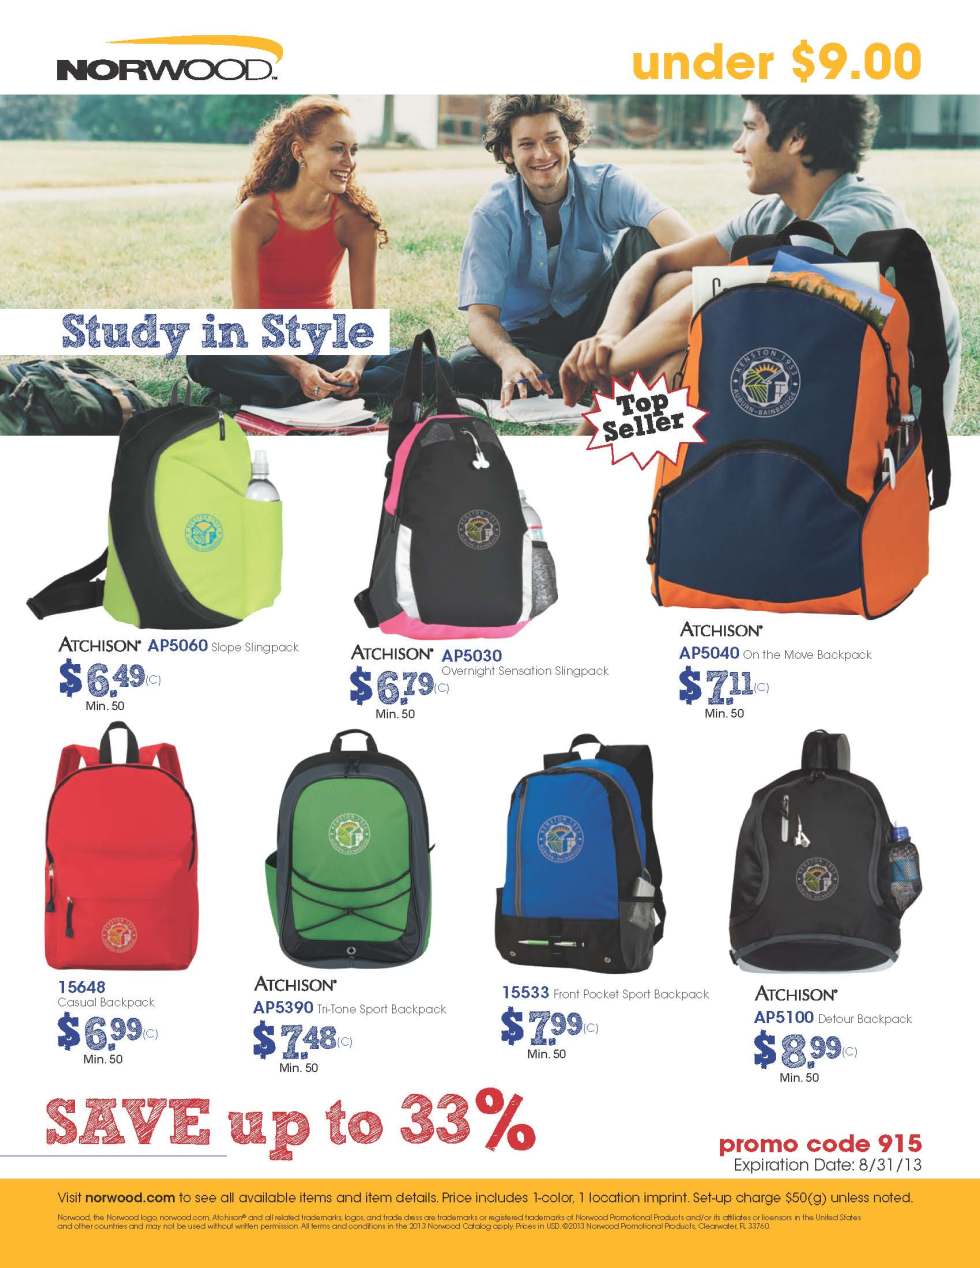 Norwood Back to School Under $9 | The Promo Clearance Blog